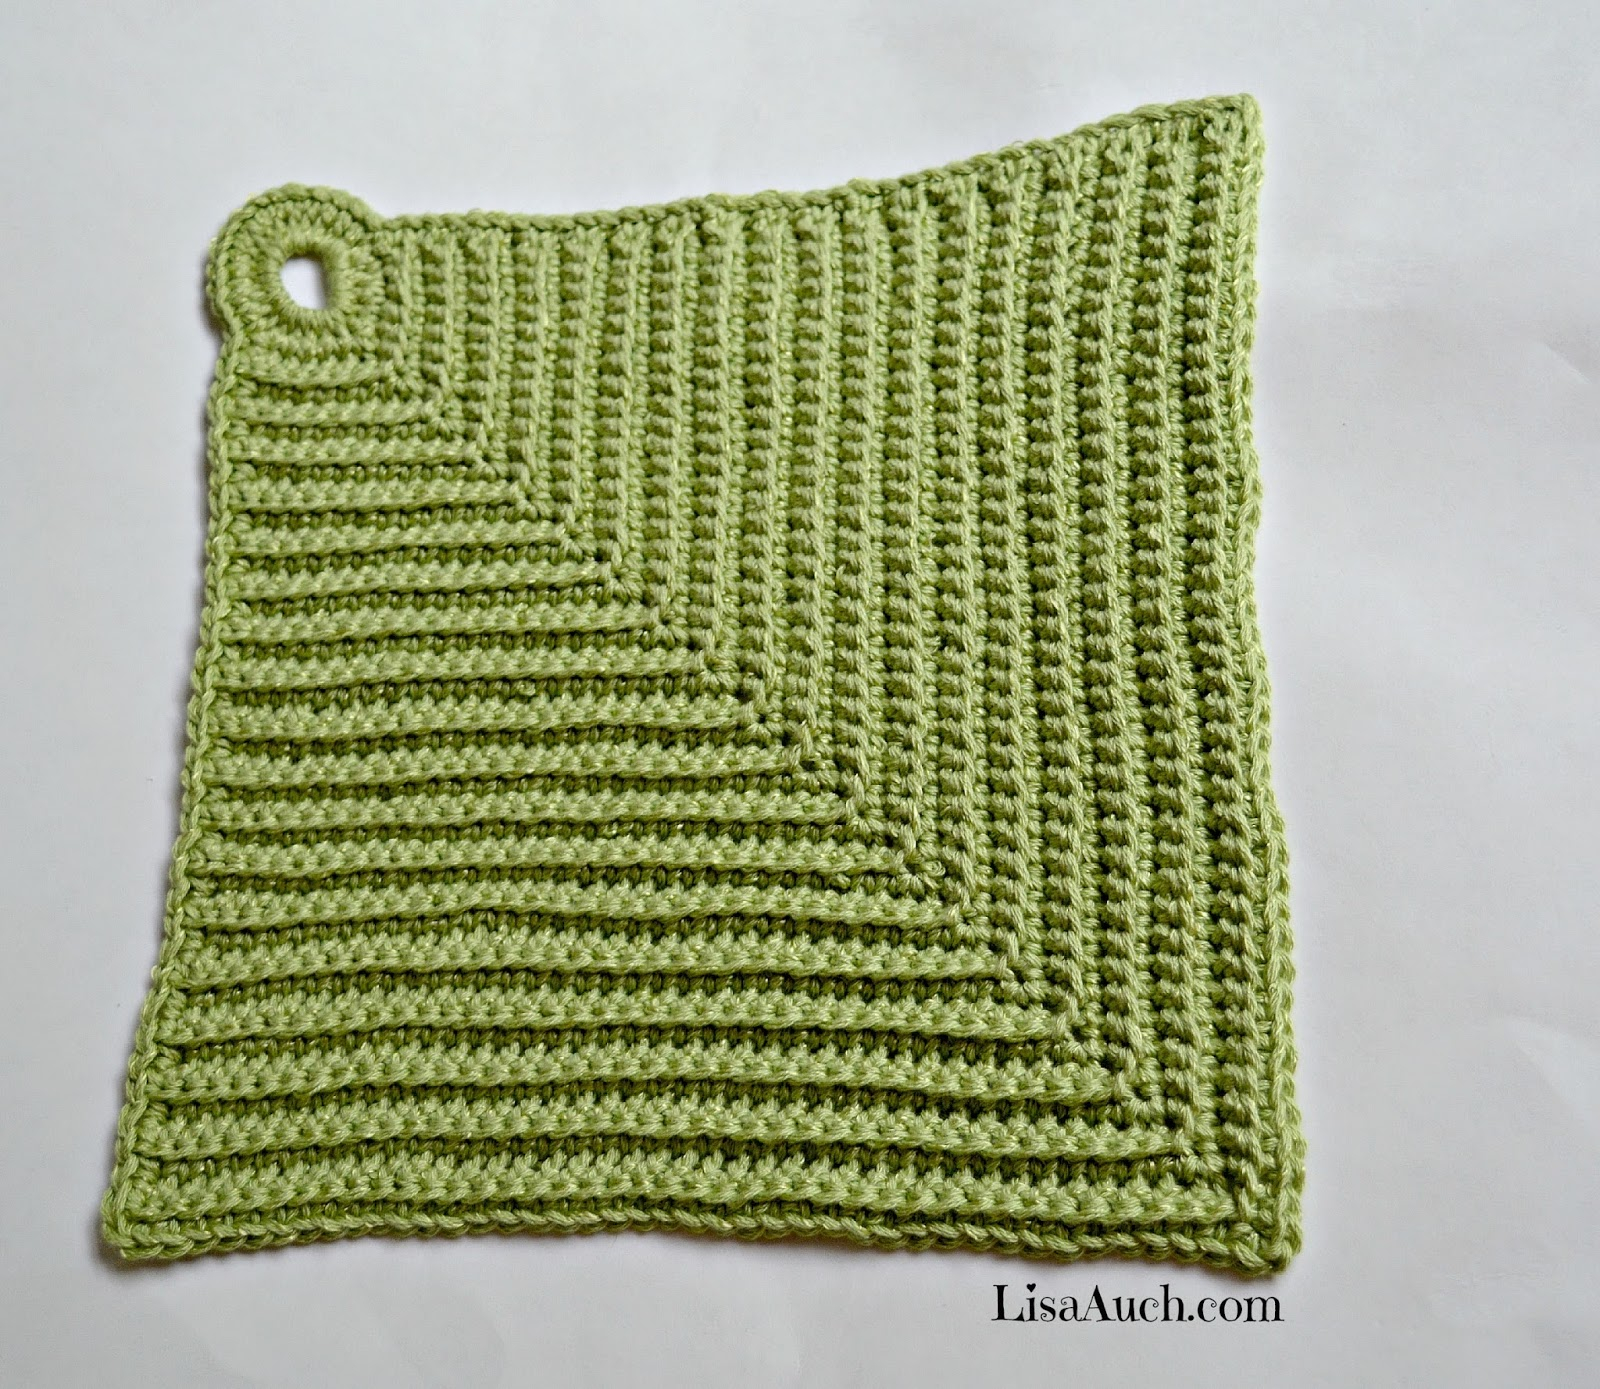 Crochet Dishcloth Pattern Free Crochet Patterns And Designs Lisaauch Free Easy Crochet